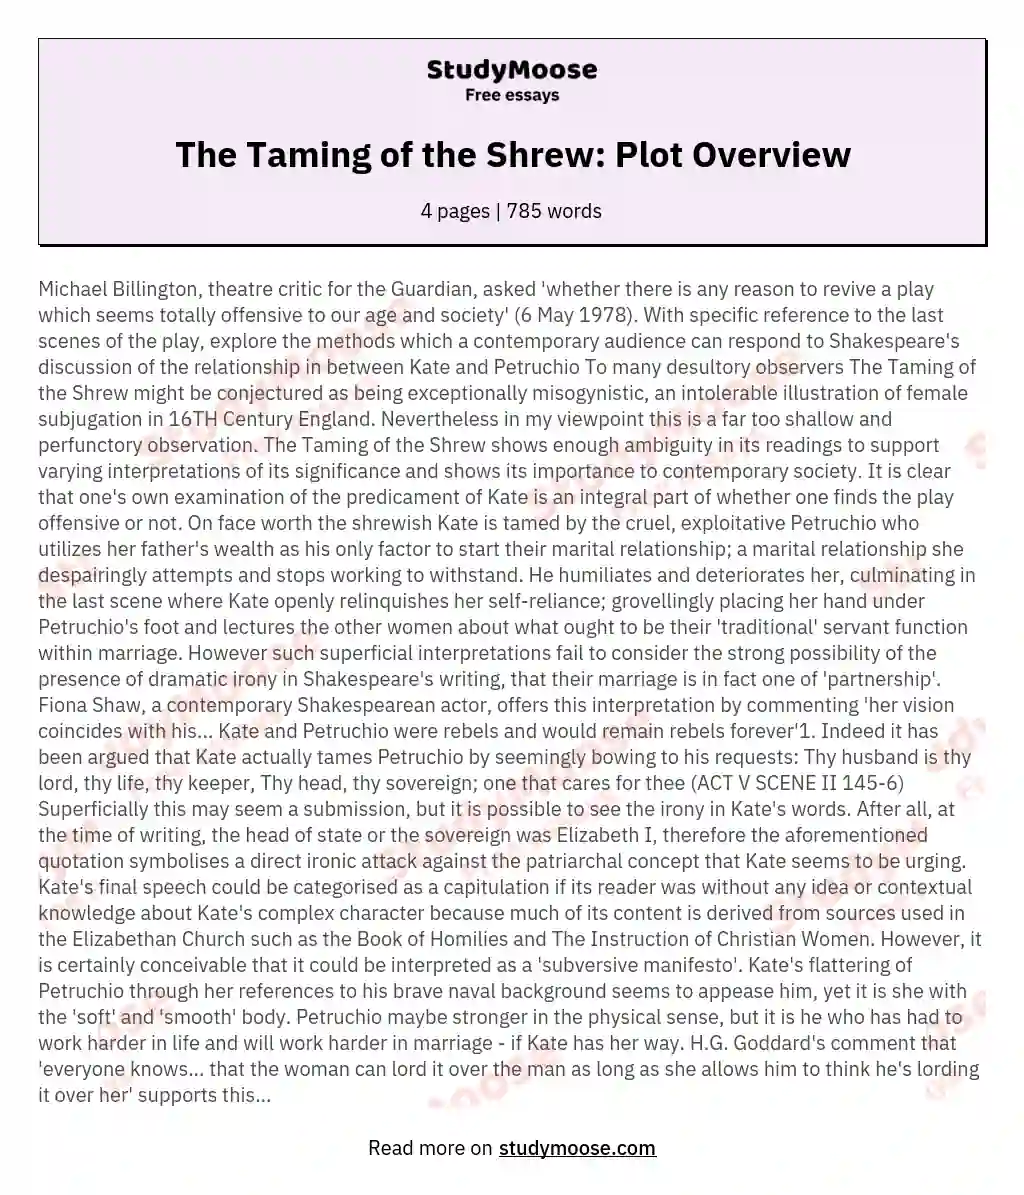 The Taming of the Shrew: Plot Overview